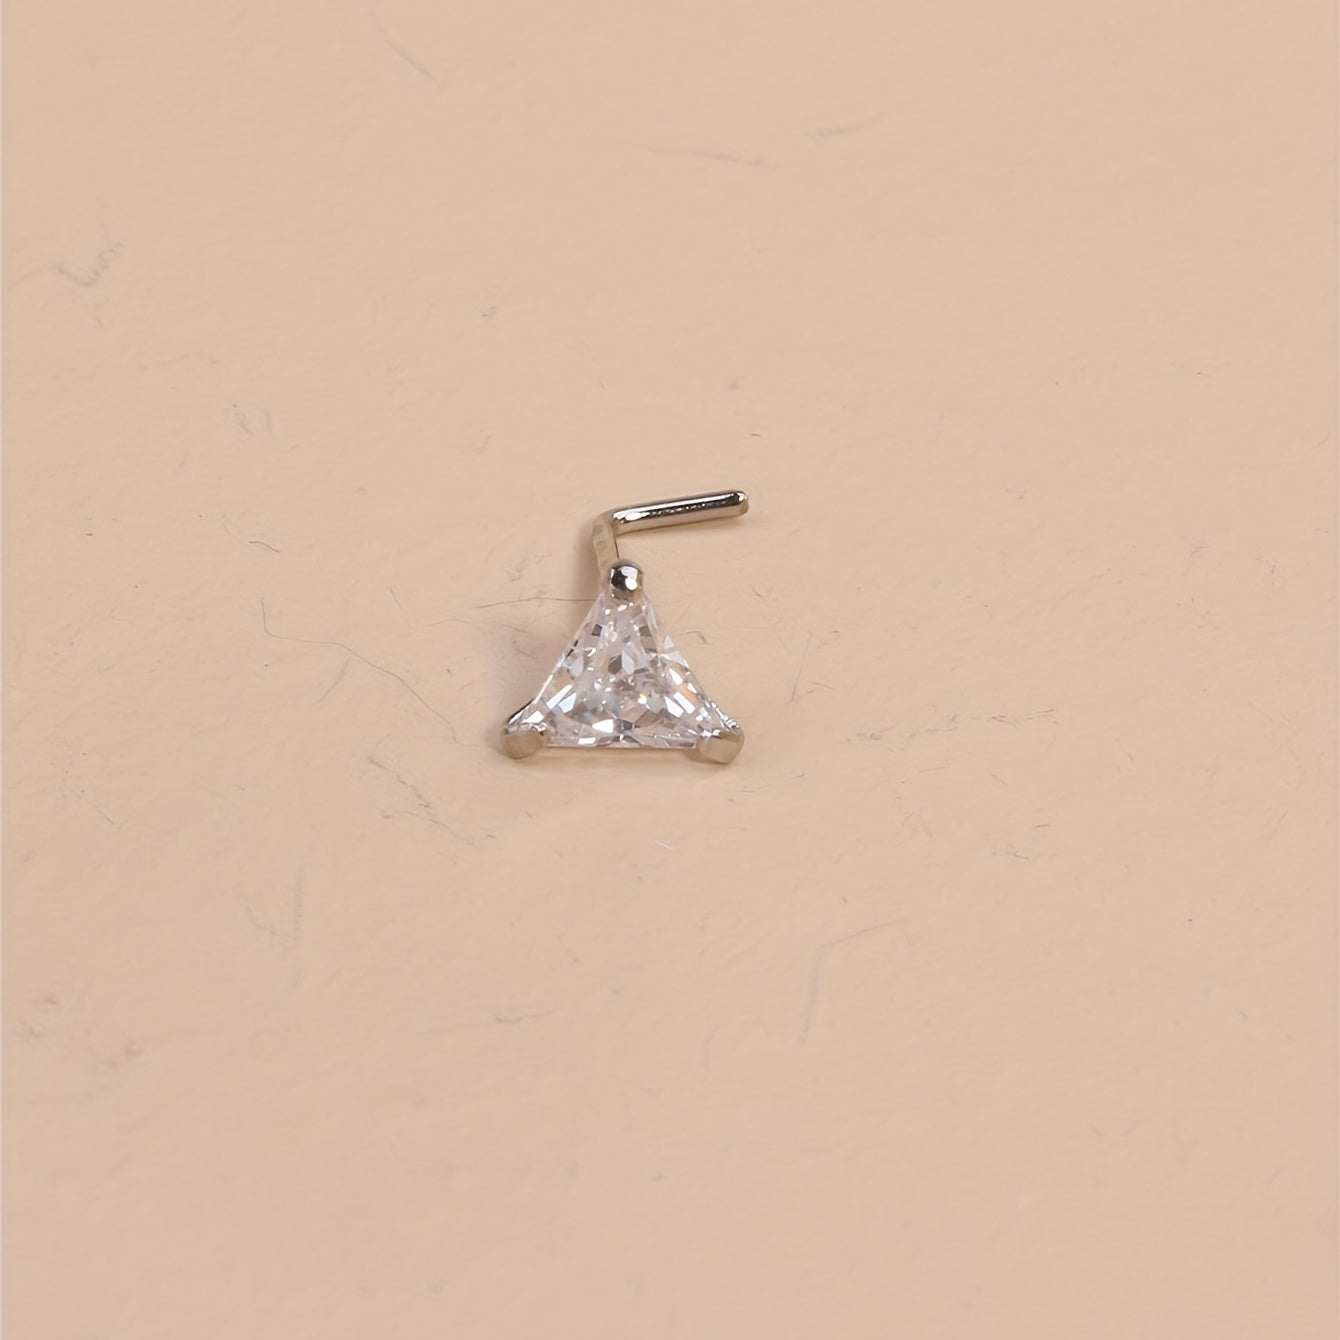 1PC Triangle Shape Nose Ring Cubic Zirconia L Shape Women's Nose Ring Stud Body Piercing Jewelry